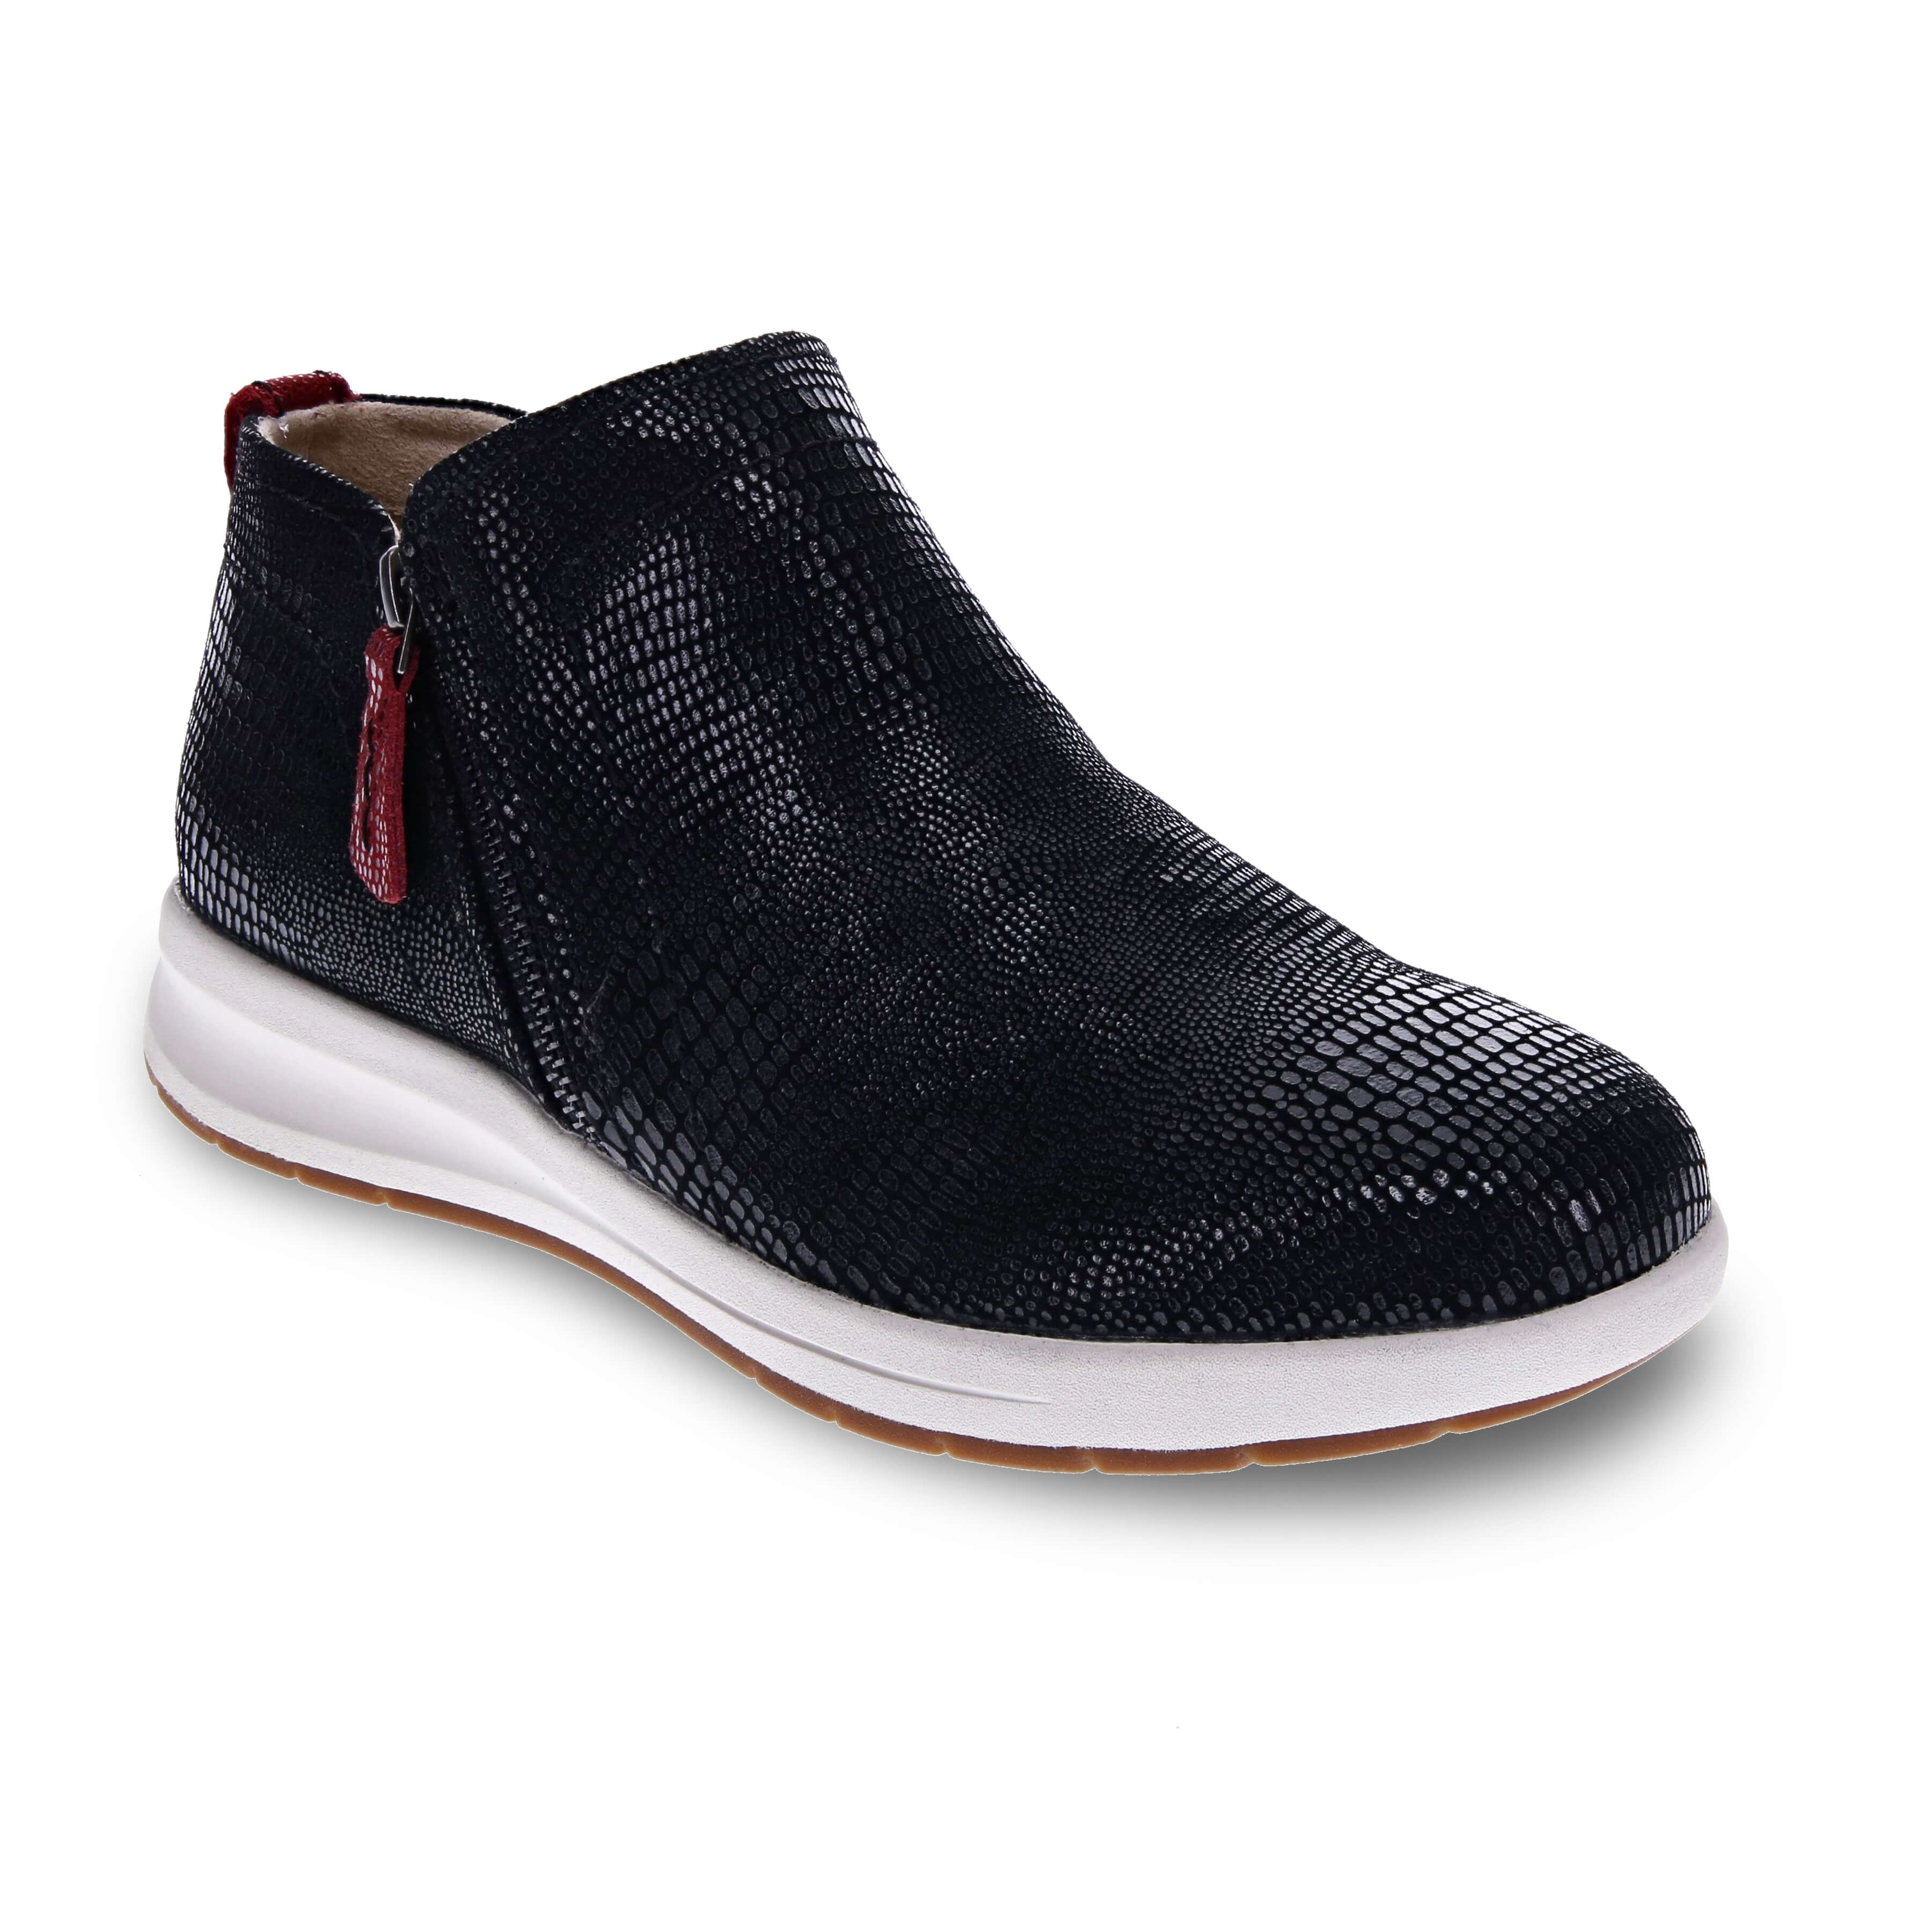 Revere Dublin - Women's Casual Boot - Extra Depth With Removable Footbeds